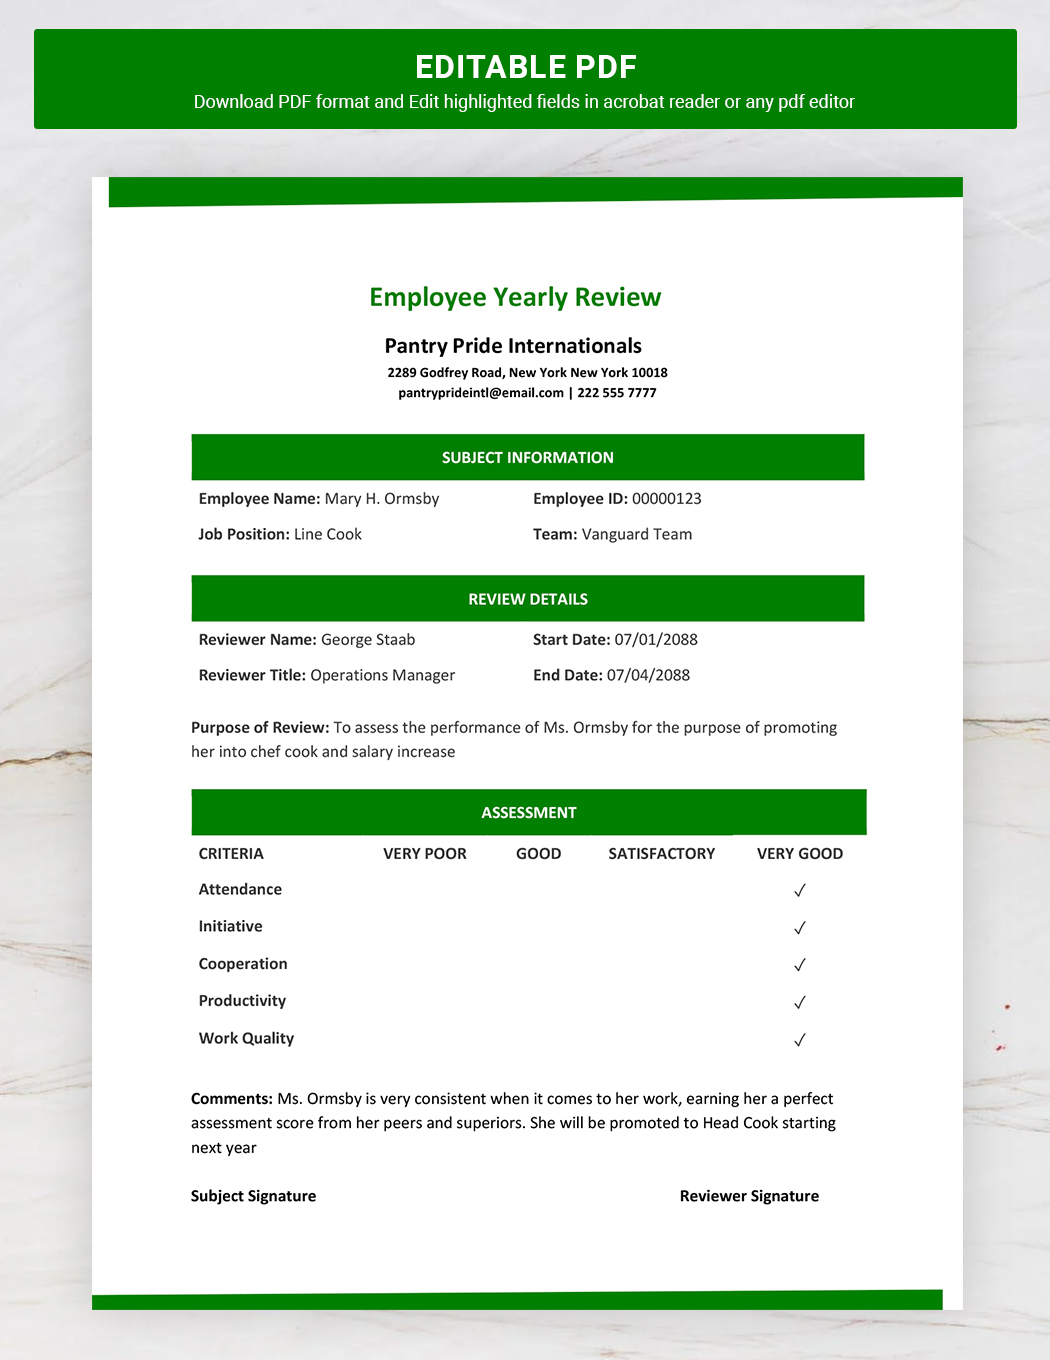 Employee Yearly Review Template